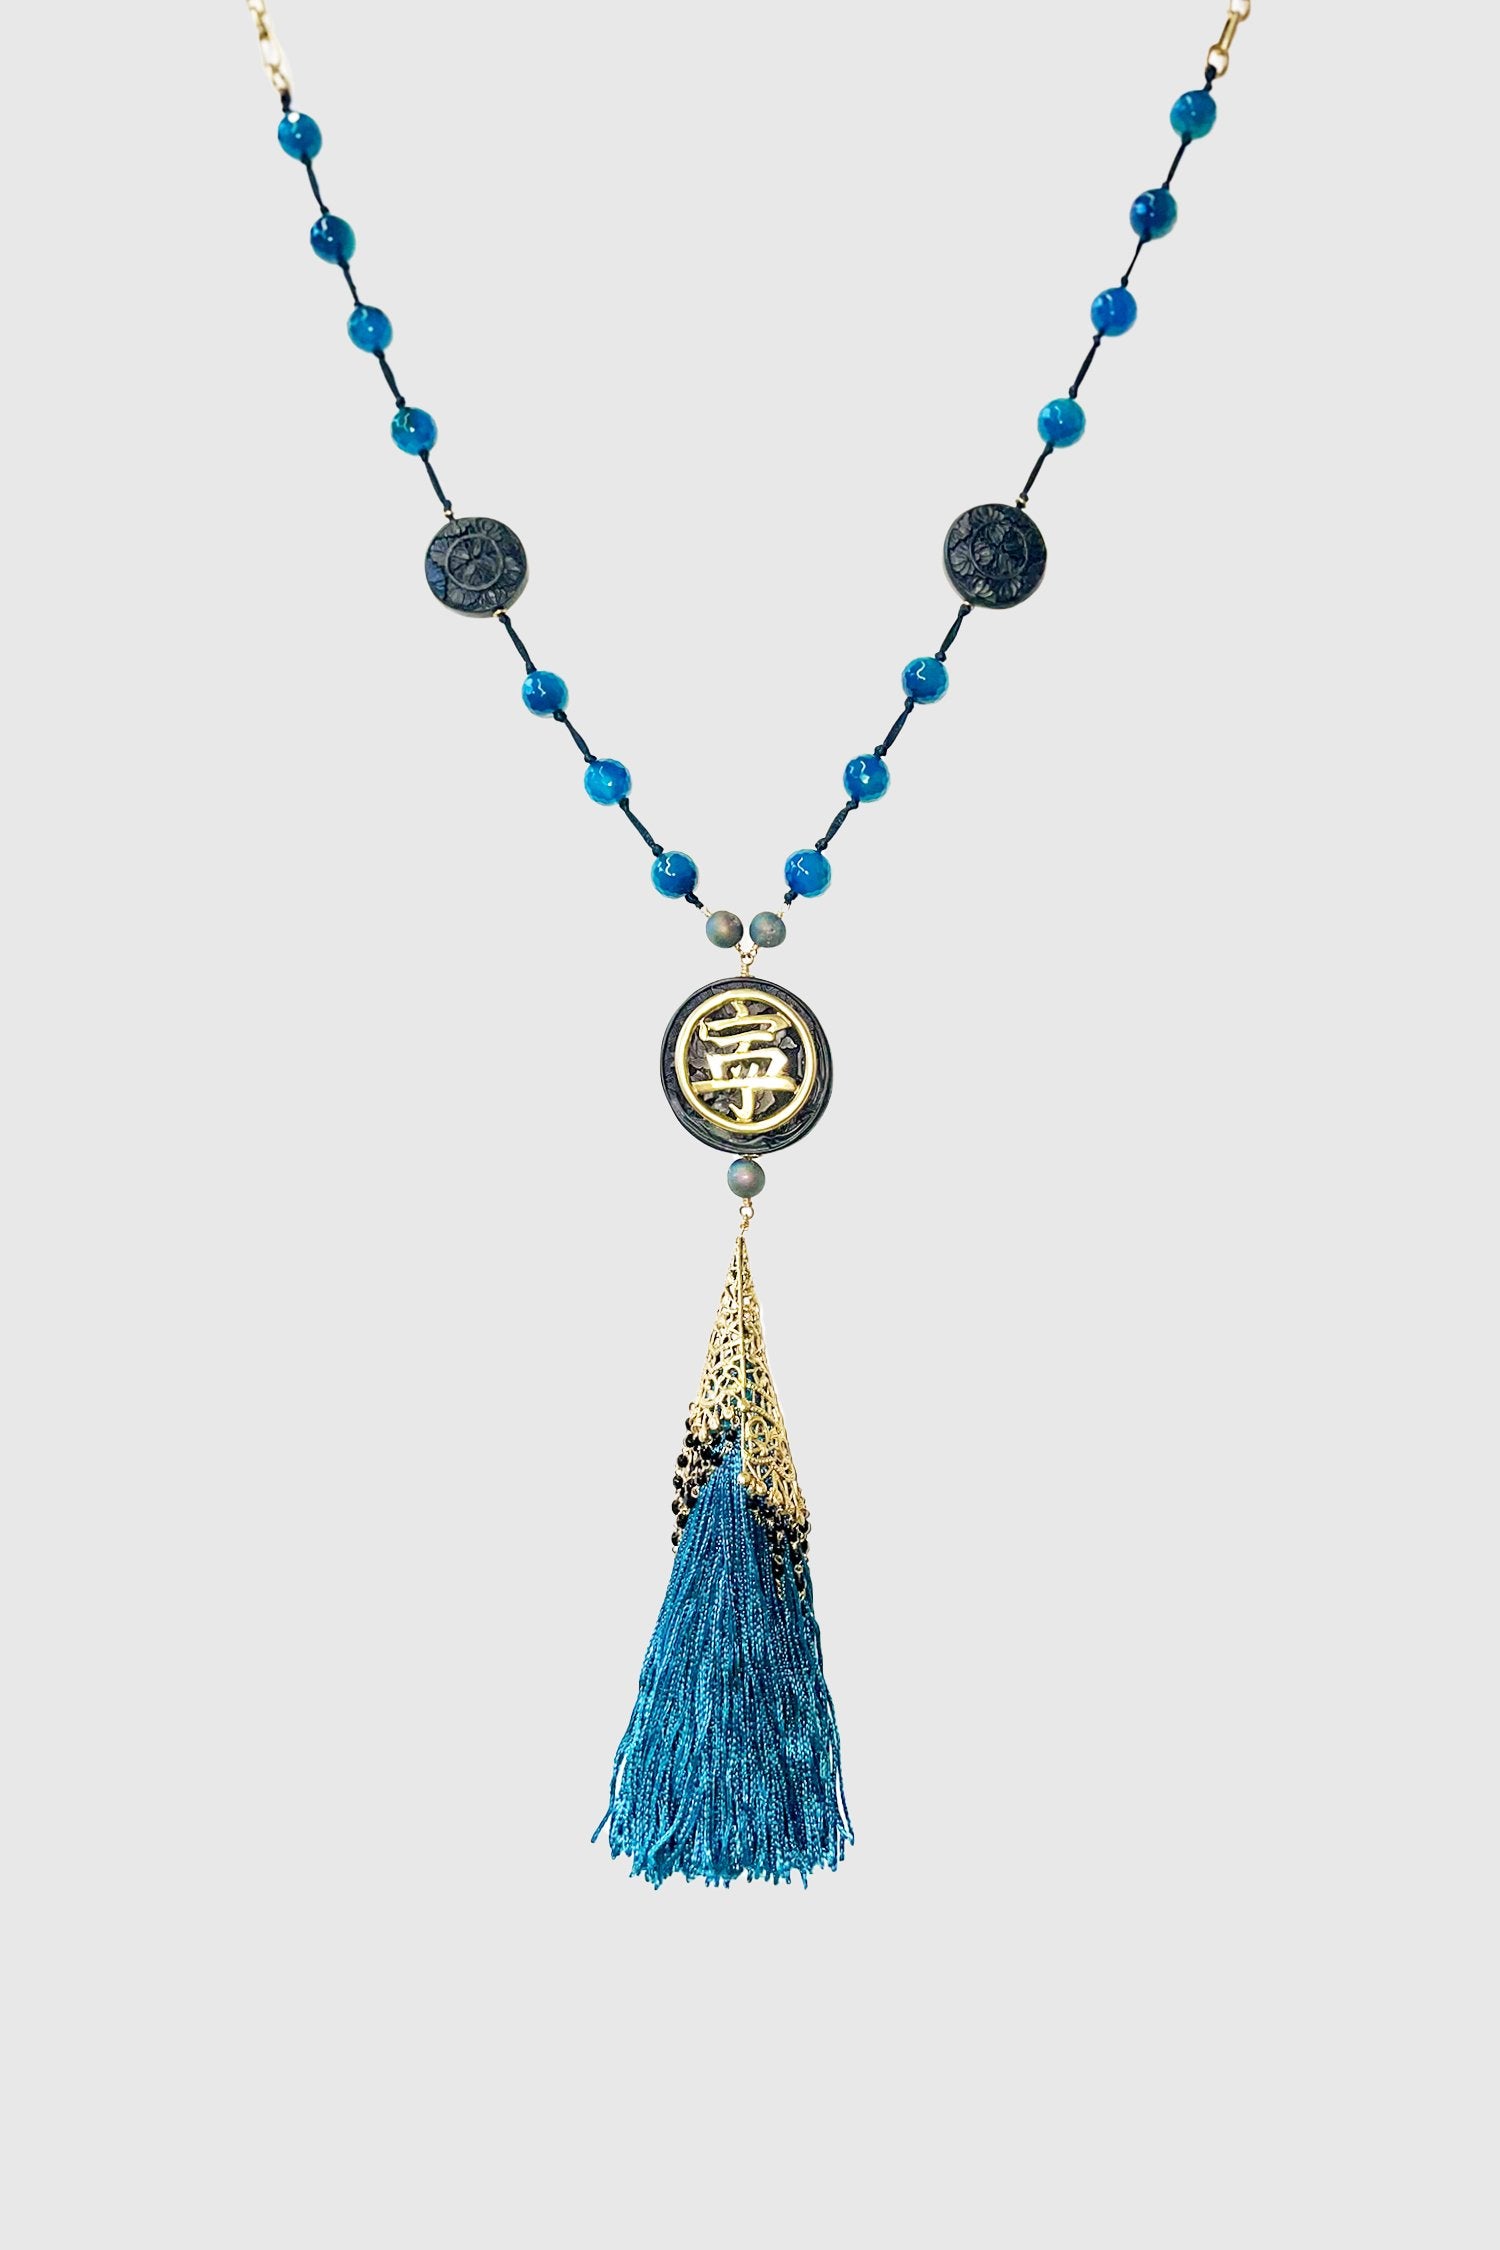 Anna Sui x Erickson Beamon, Necklace colored blue beads, round wood badge with Chinese fonts, Tassel blue beads, gold cap